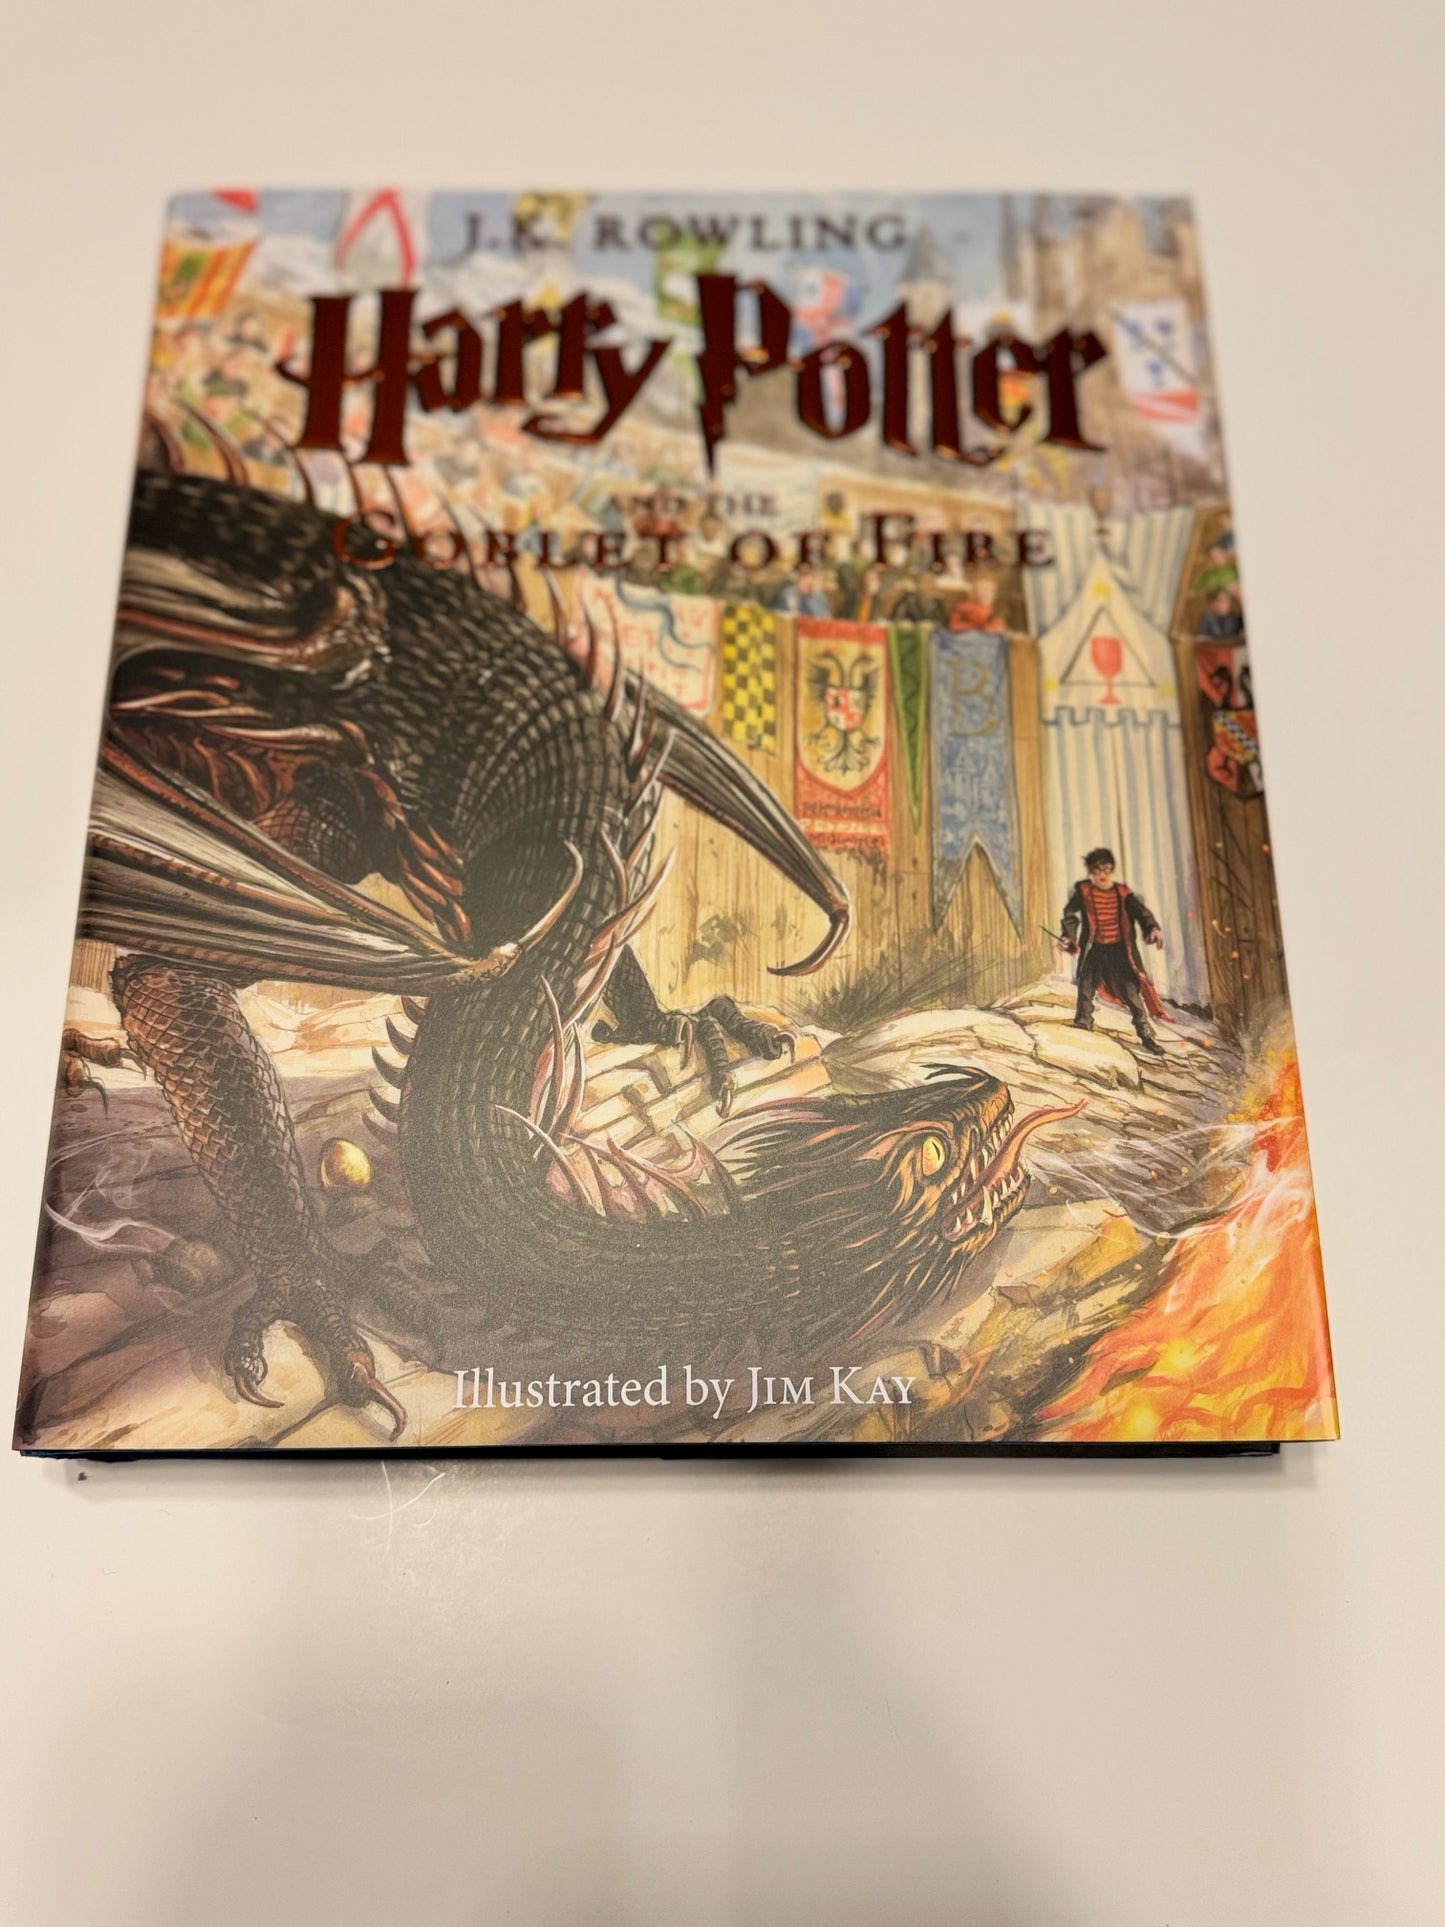 Harry Potter Book Bundle -Harry Potter and the Goblet of Fire: The Illustrated Edition & Harry Potter and the Prisoner of Azkaban: The Illustrated Edition